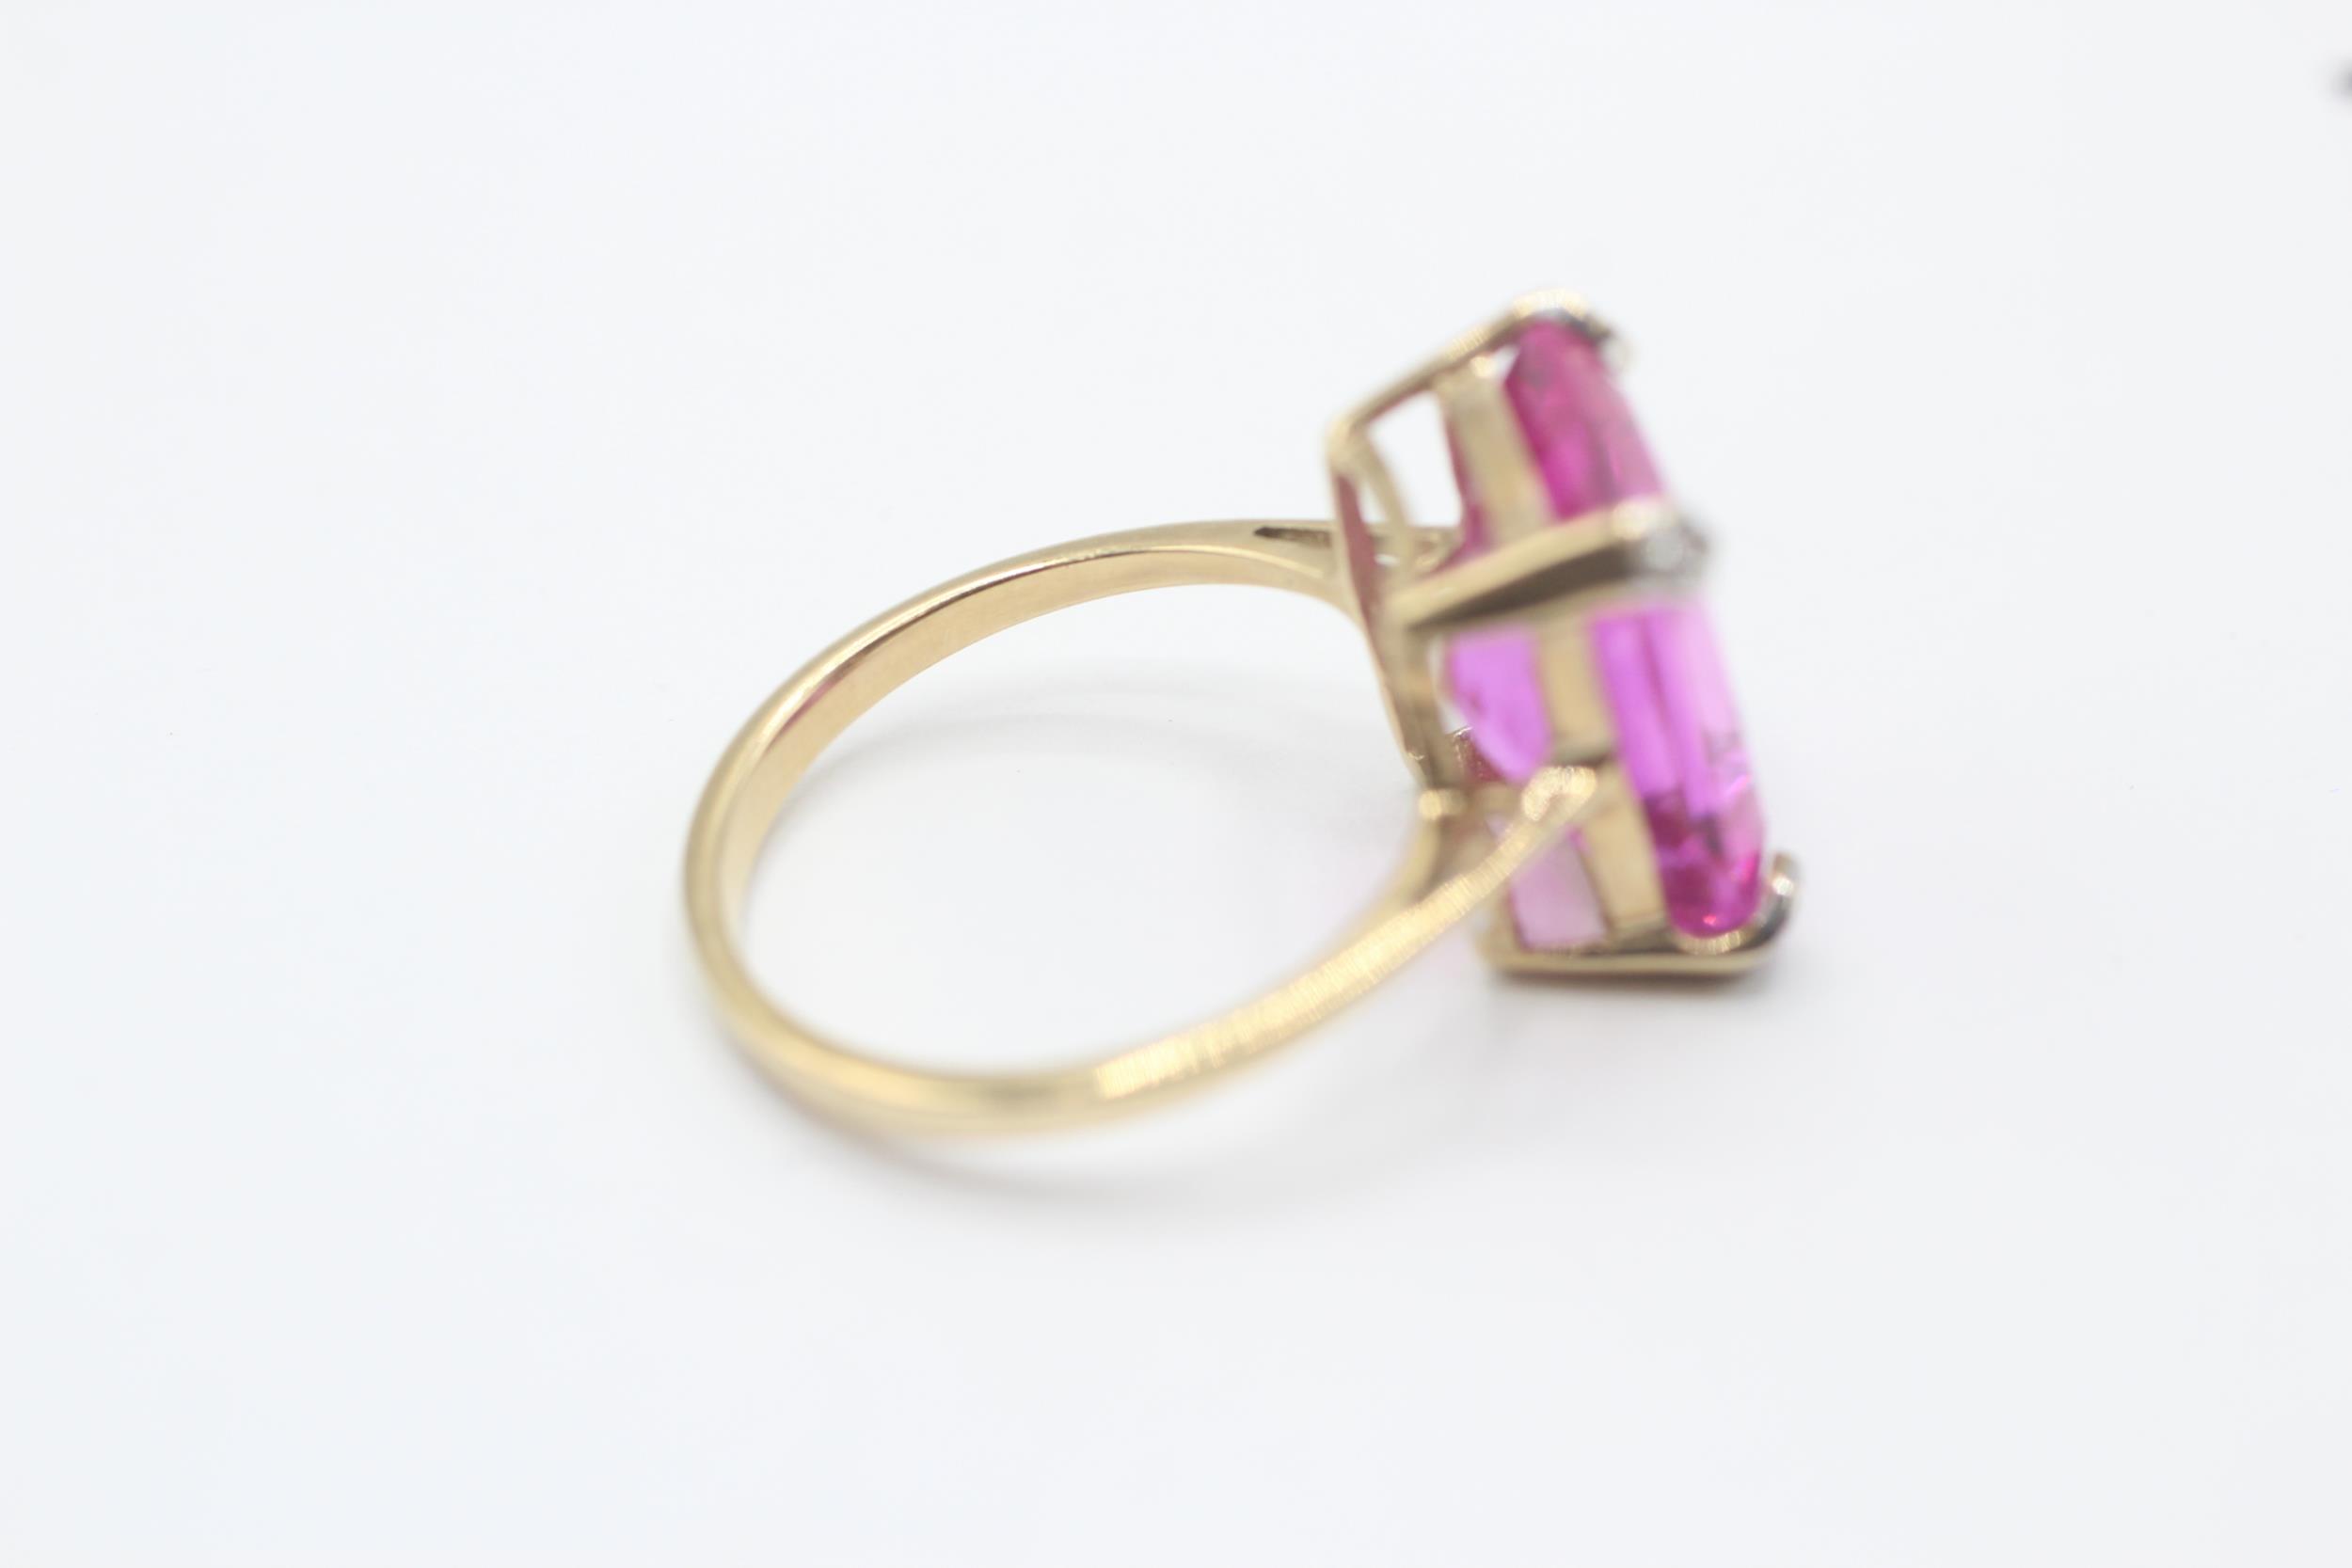 9ct gold pink gemstone and diamond cocktail ring Size N 3.9 g - Image 6 of 6